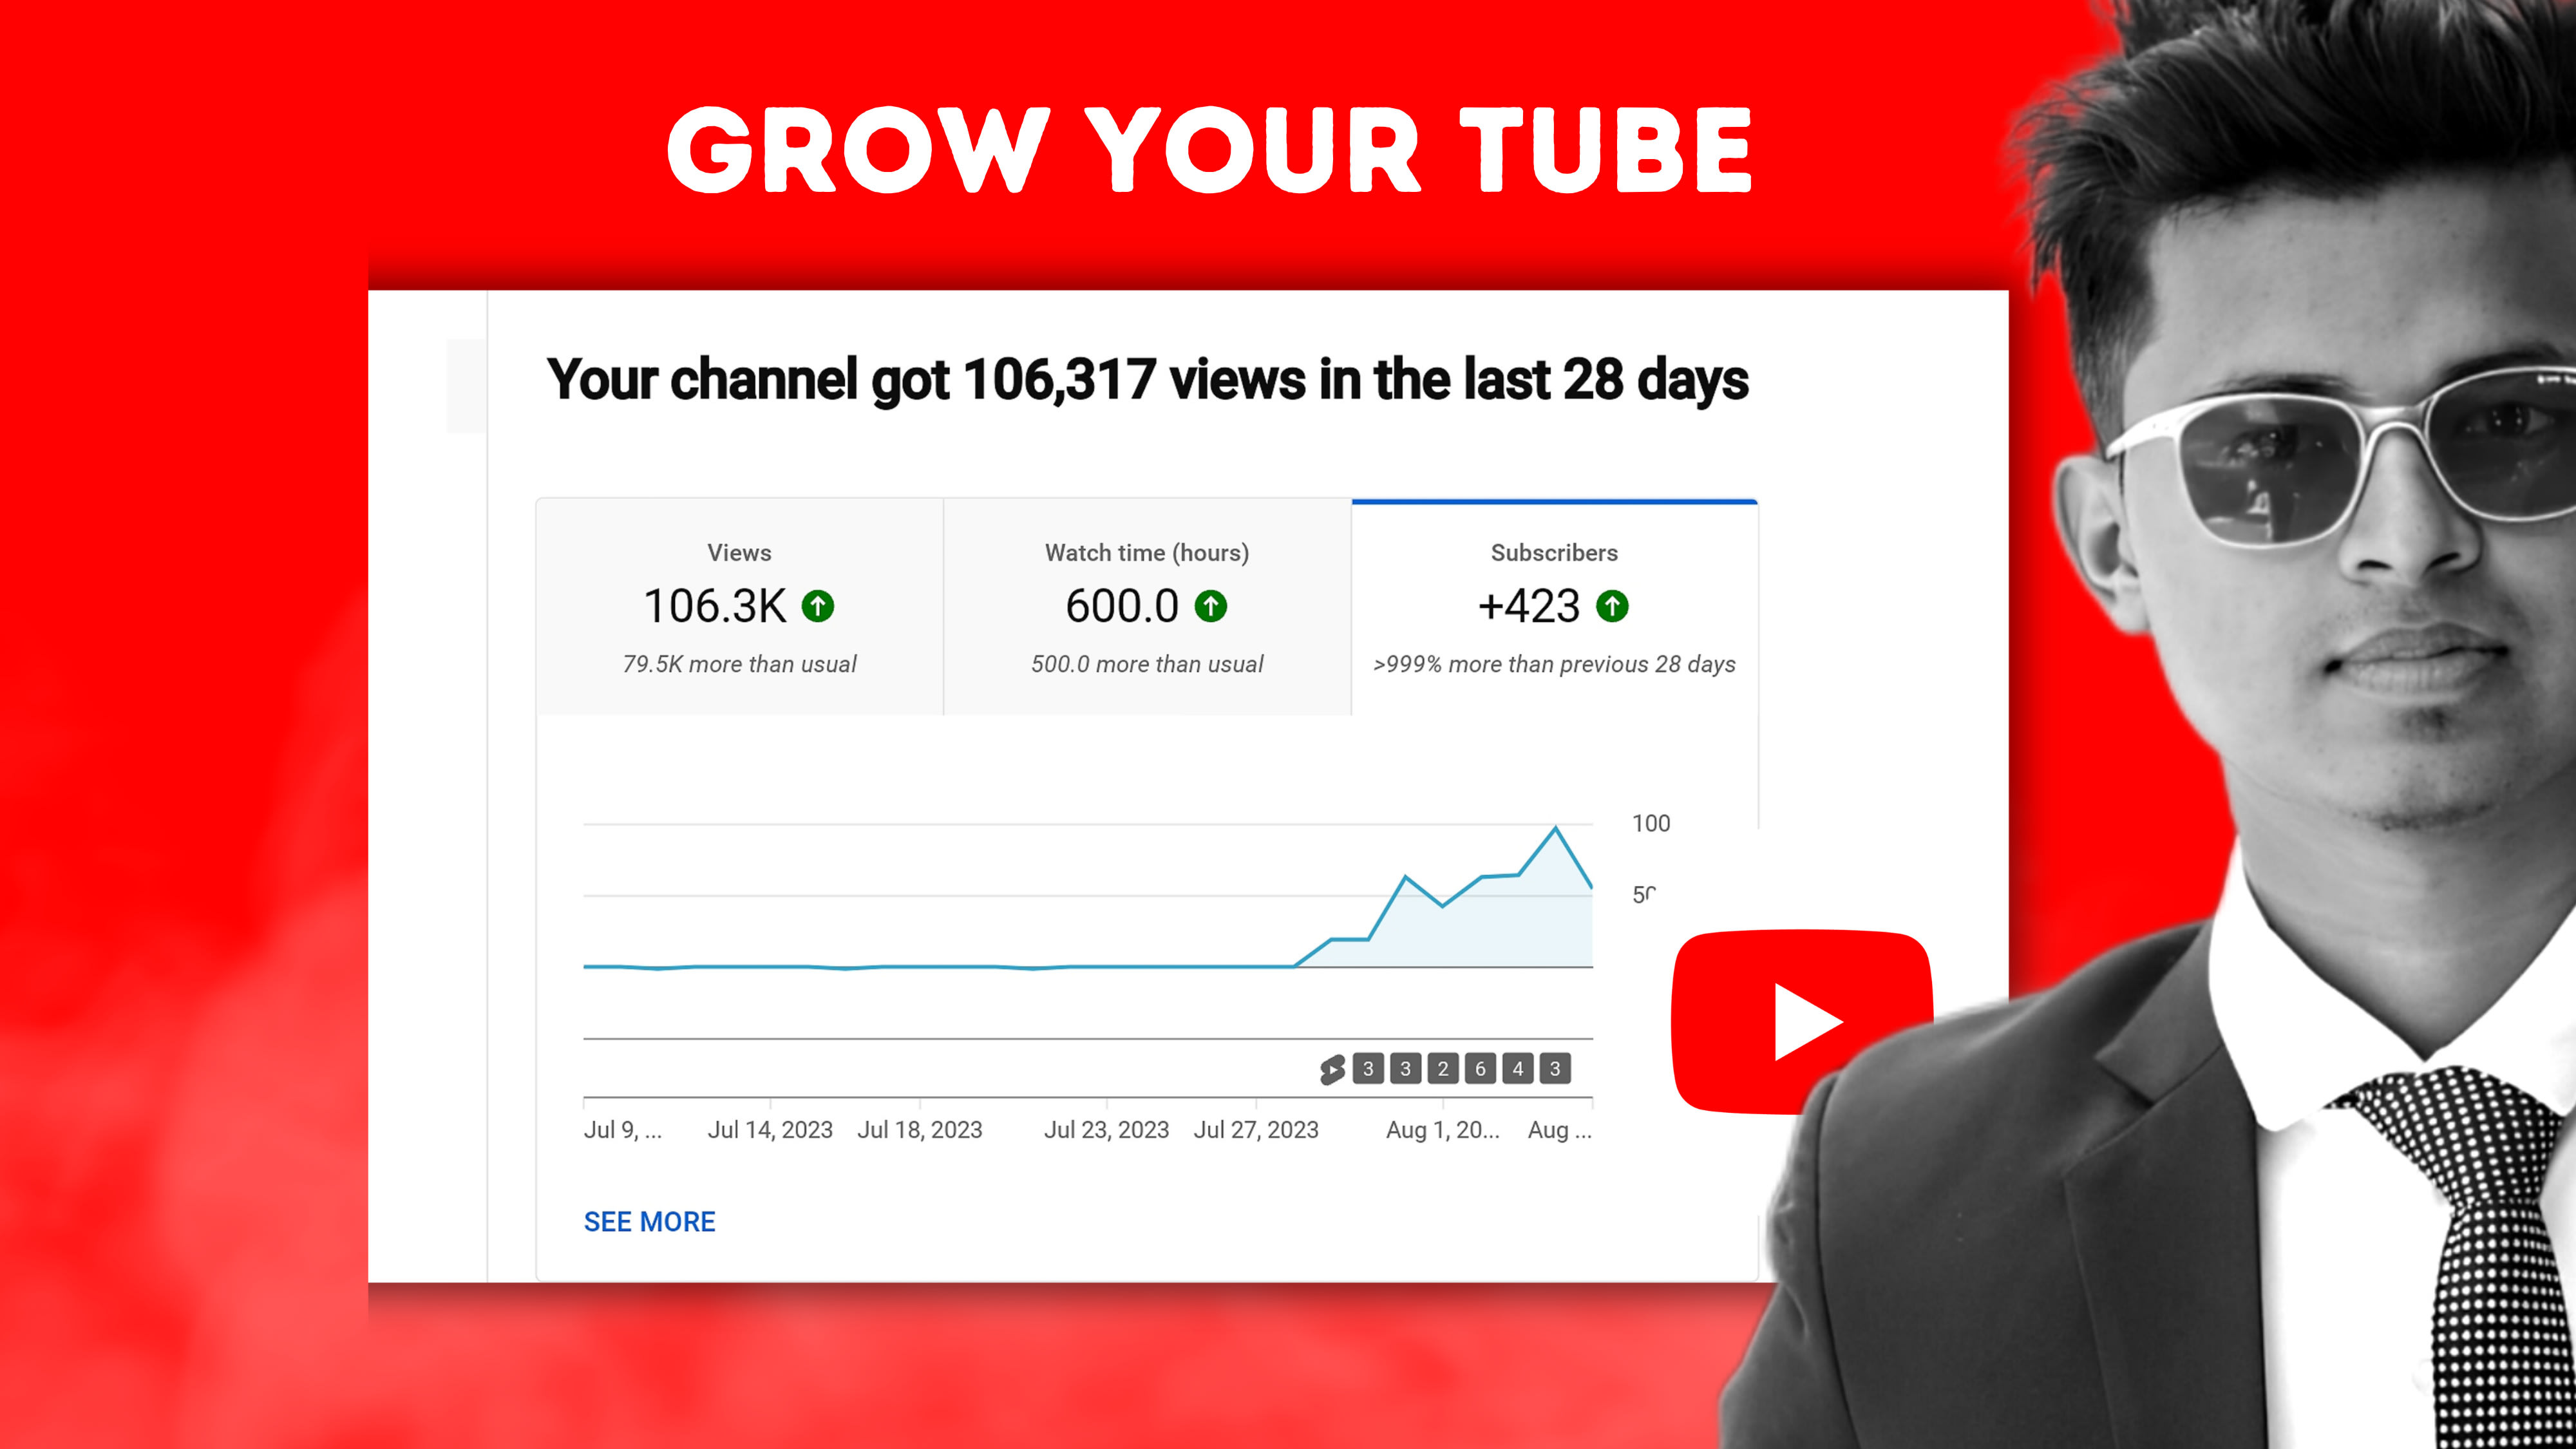 How to Grow Your  Channel With  Shorts and Clips